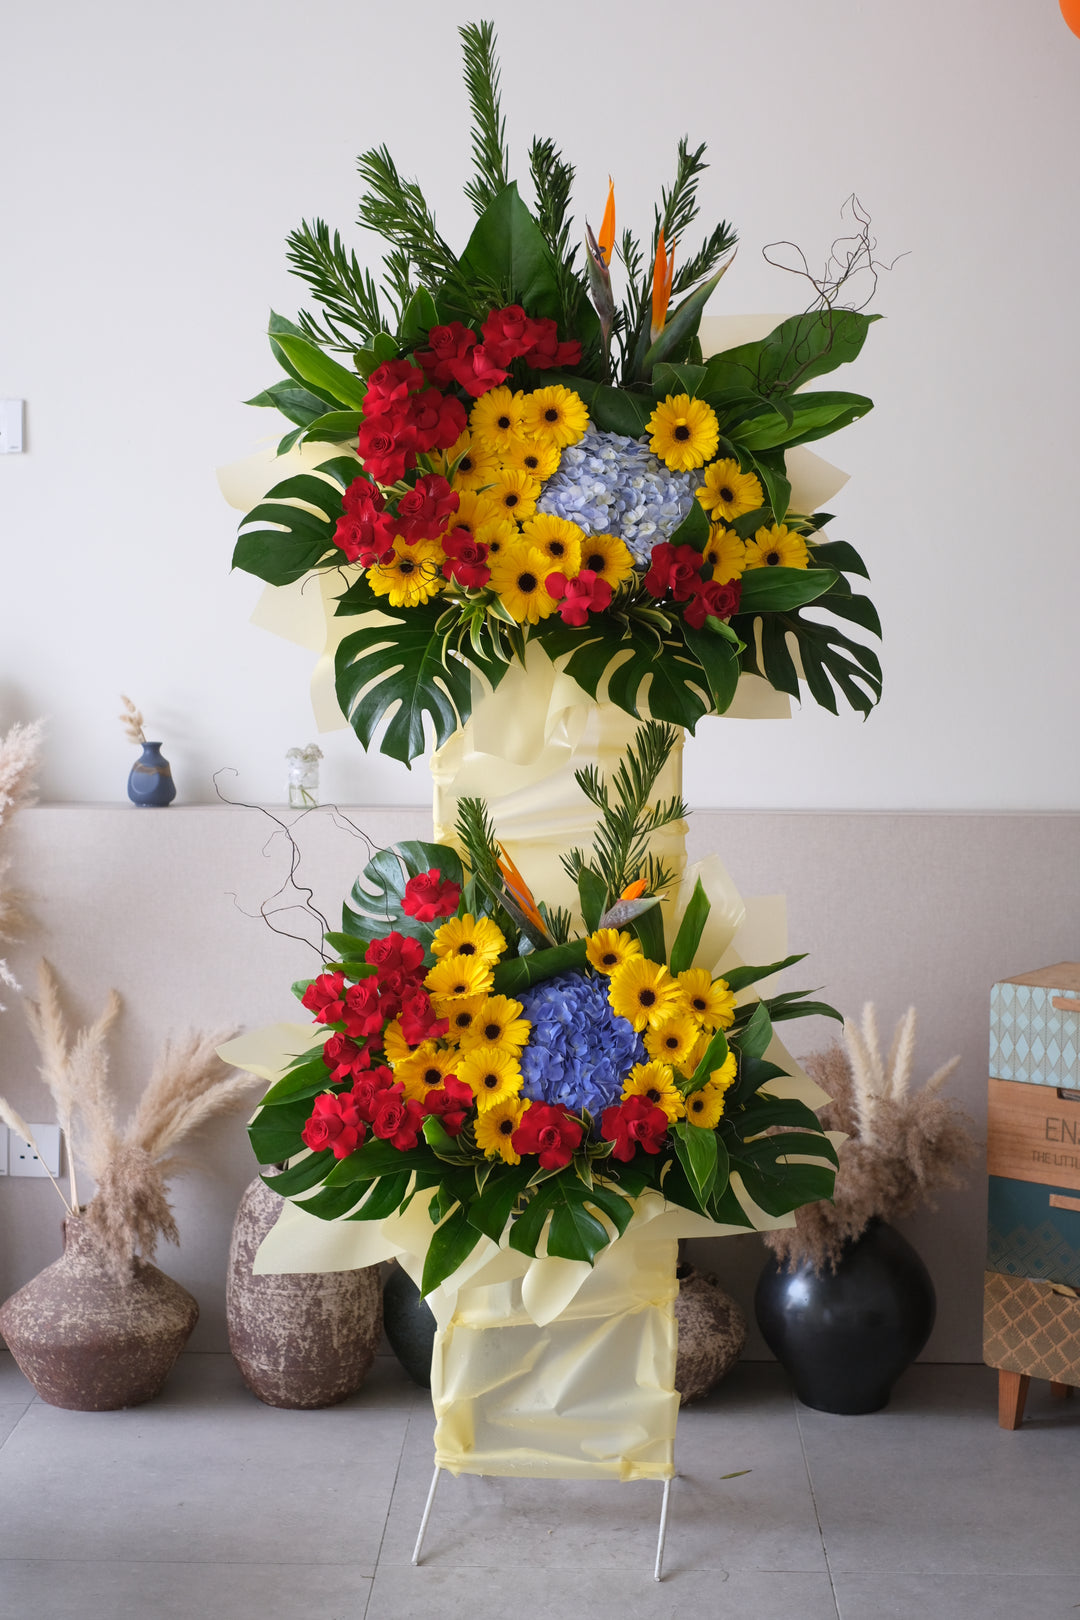 Online order graceful artificial flowers for grand opening , spruce up the venue with our artificial flowers, infusing the space with Japandi spirit. Same day flower delivery available across Penang, by Bamboo Green Florist in Bukit Mertajam